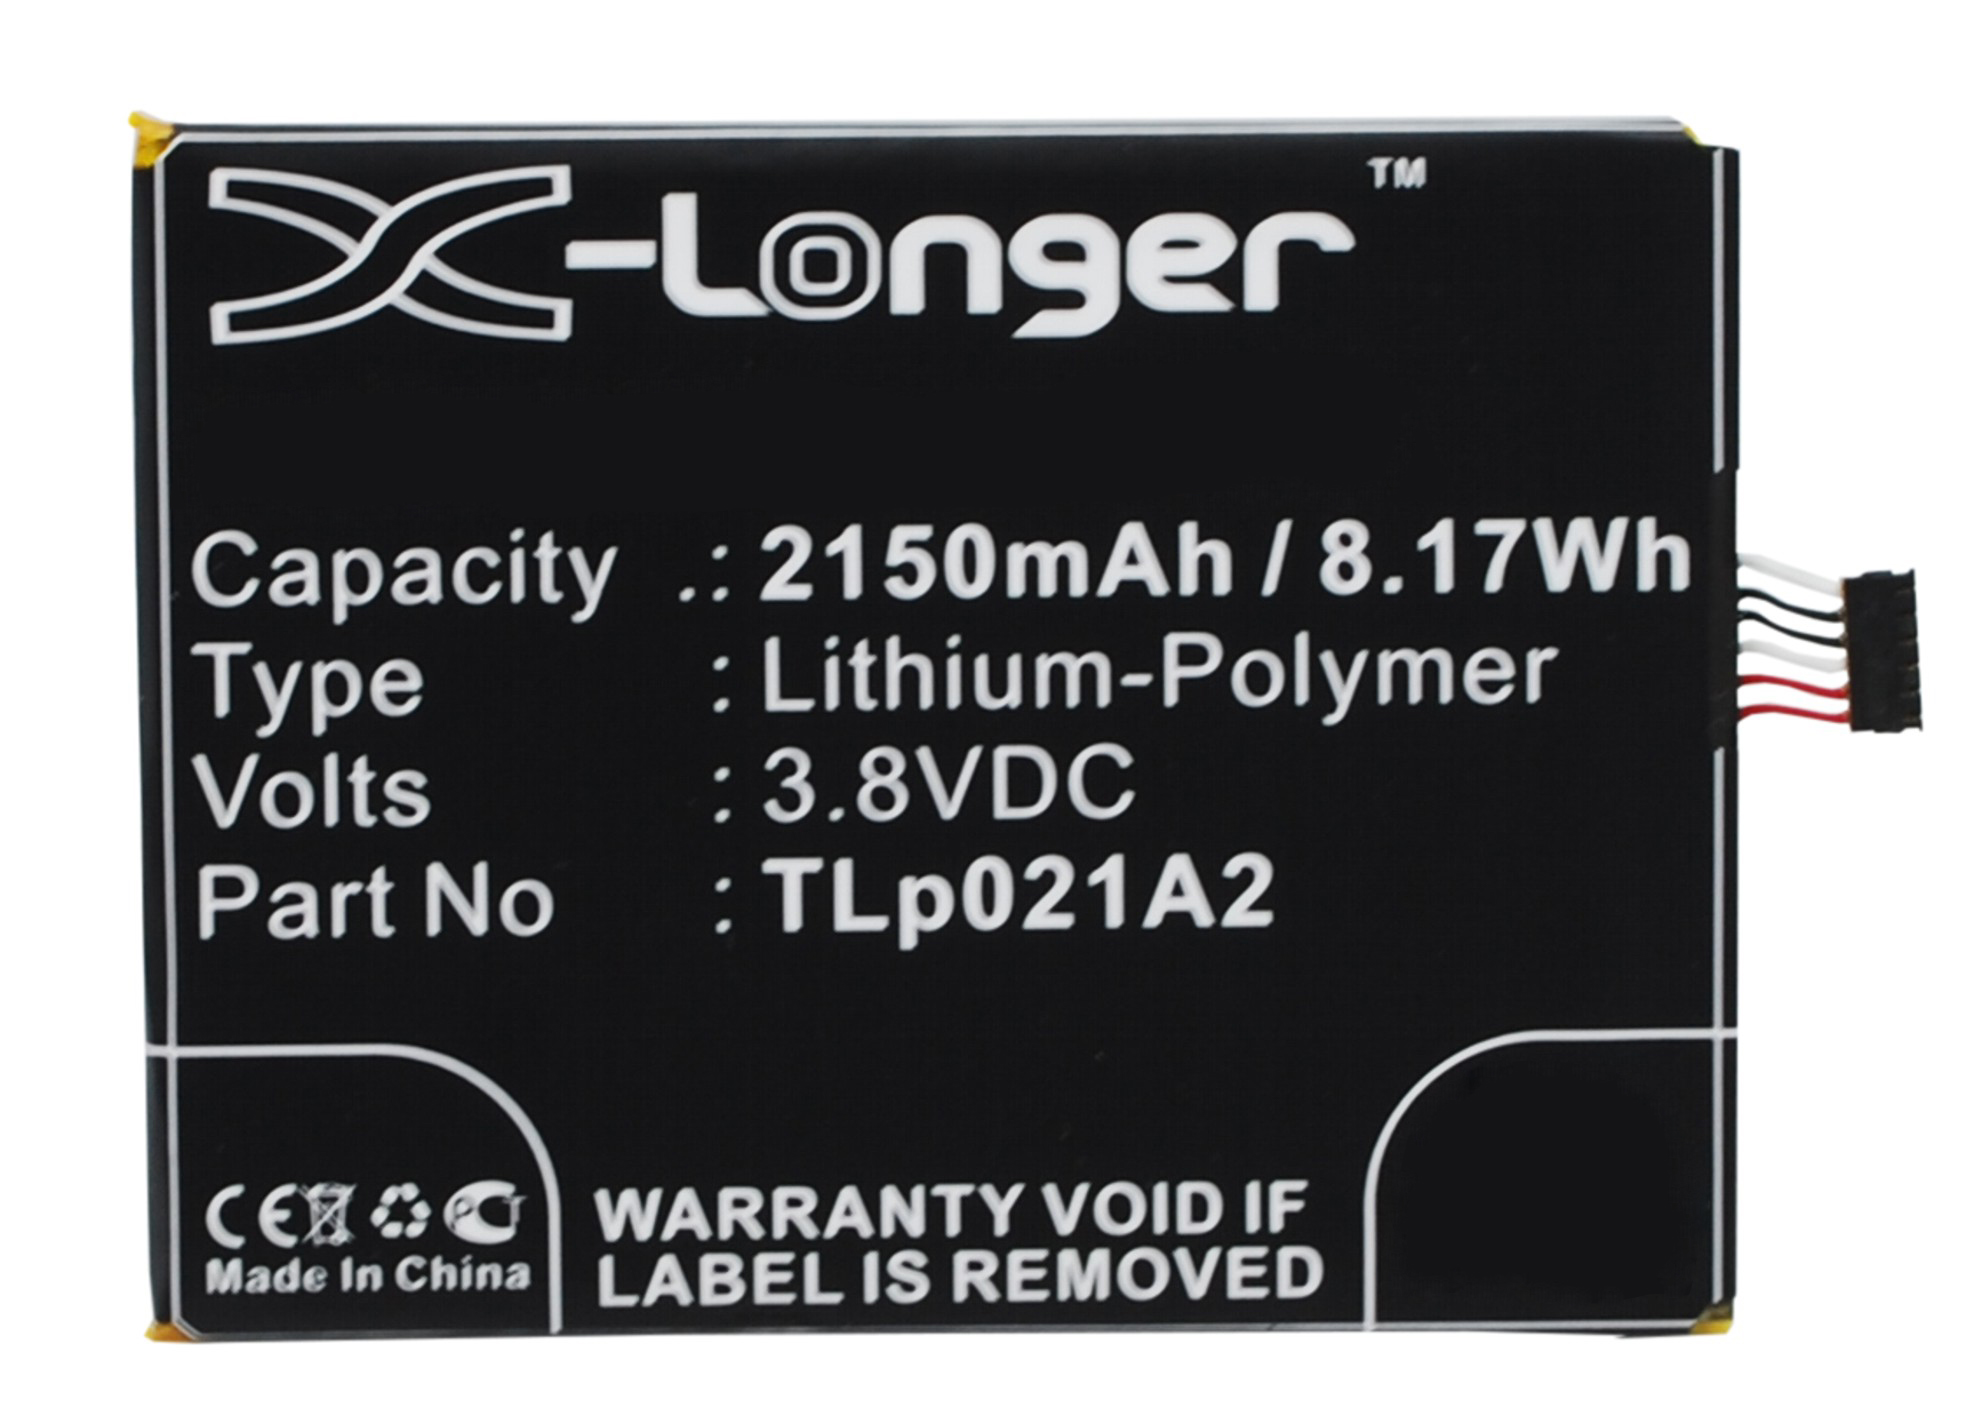 Synergy Digital Battery Compatible With Alcatel TLp021A2 Cellphone Battery - (Li-Pol, 3.8V, 2150 mAh / 8.17Wh)